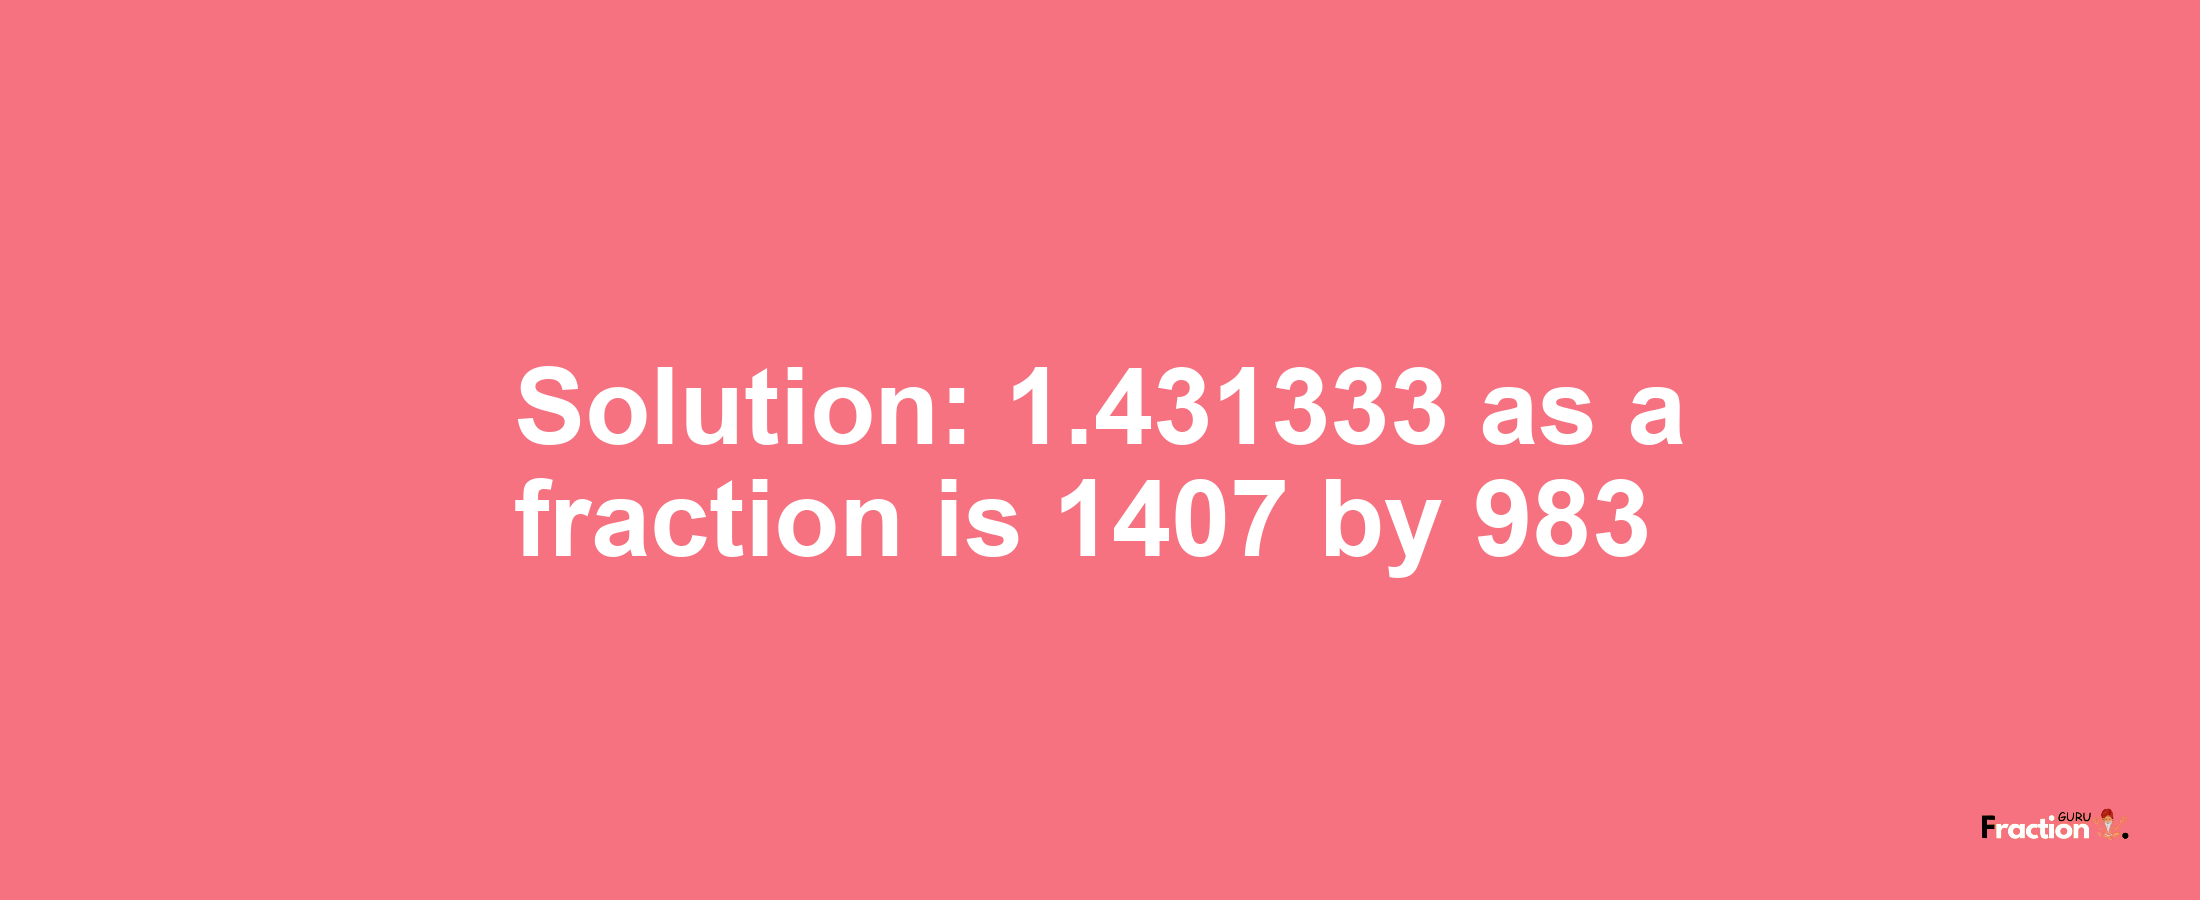 Solution:1.431333 as a fraction is 1407/983